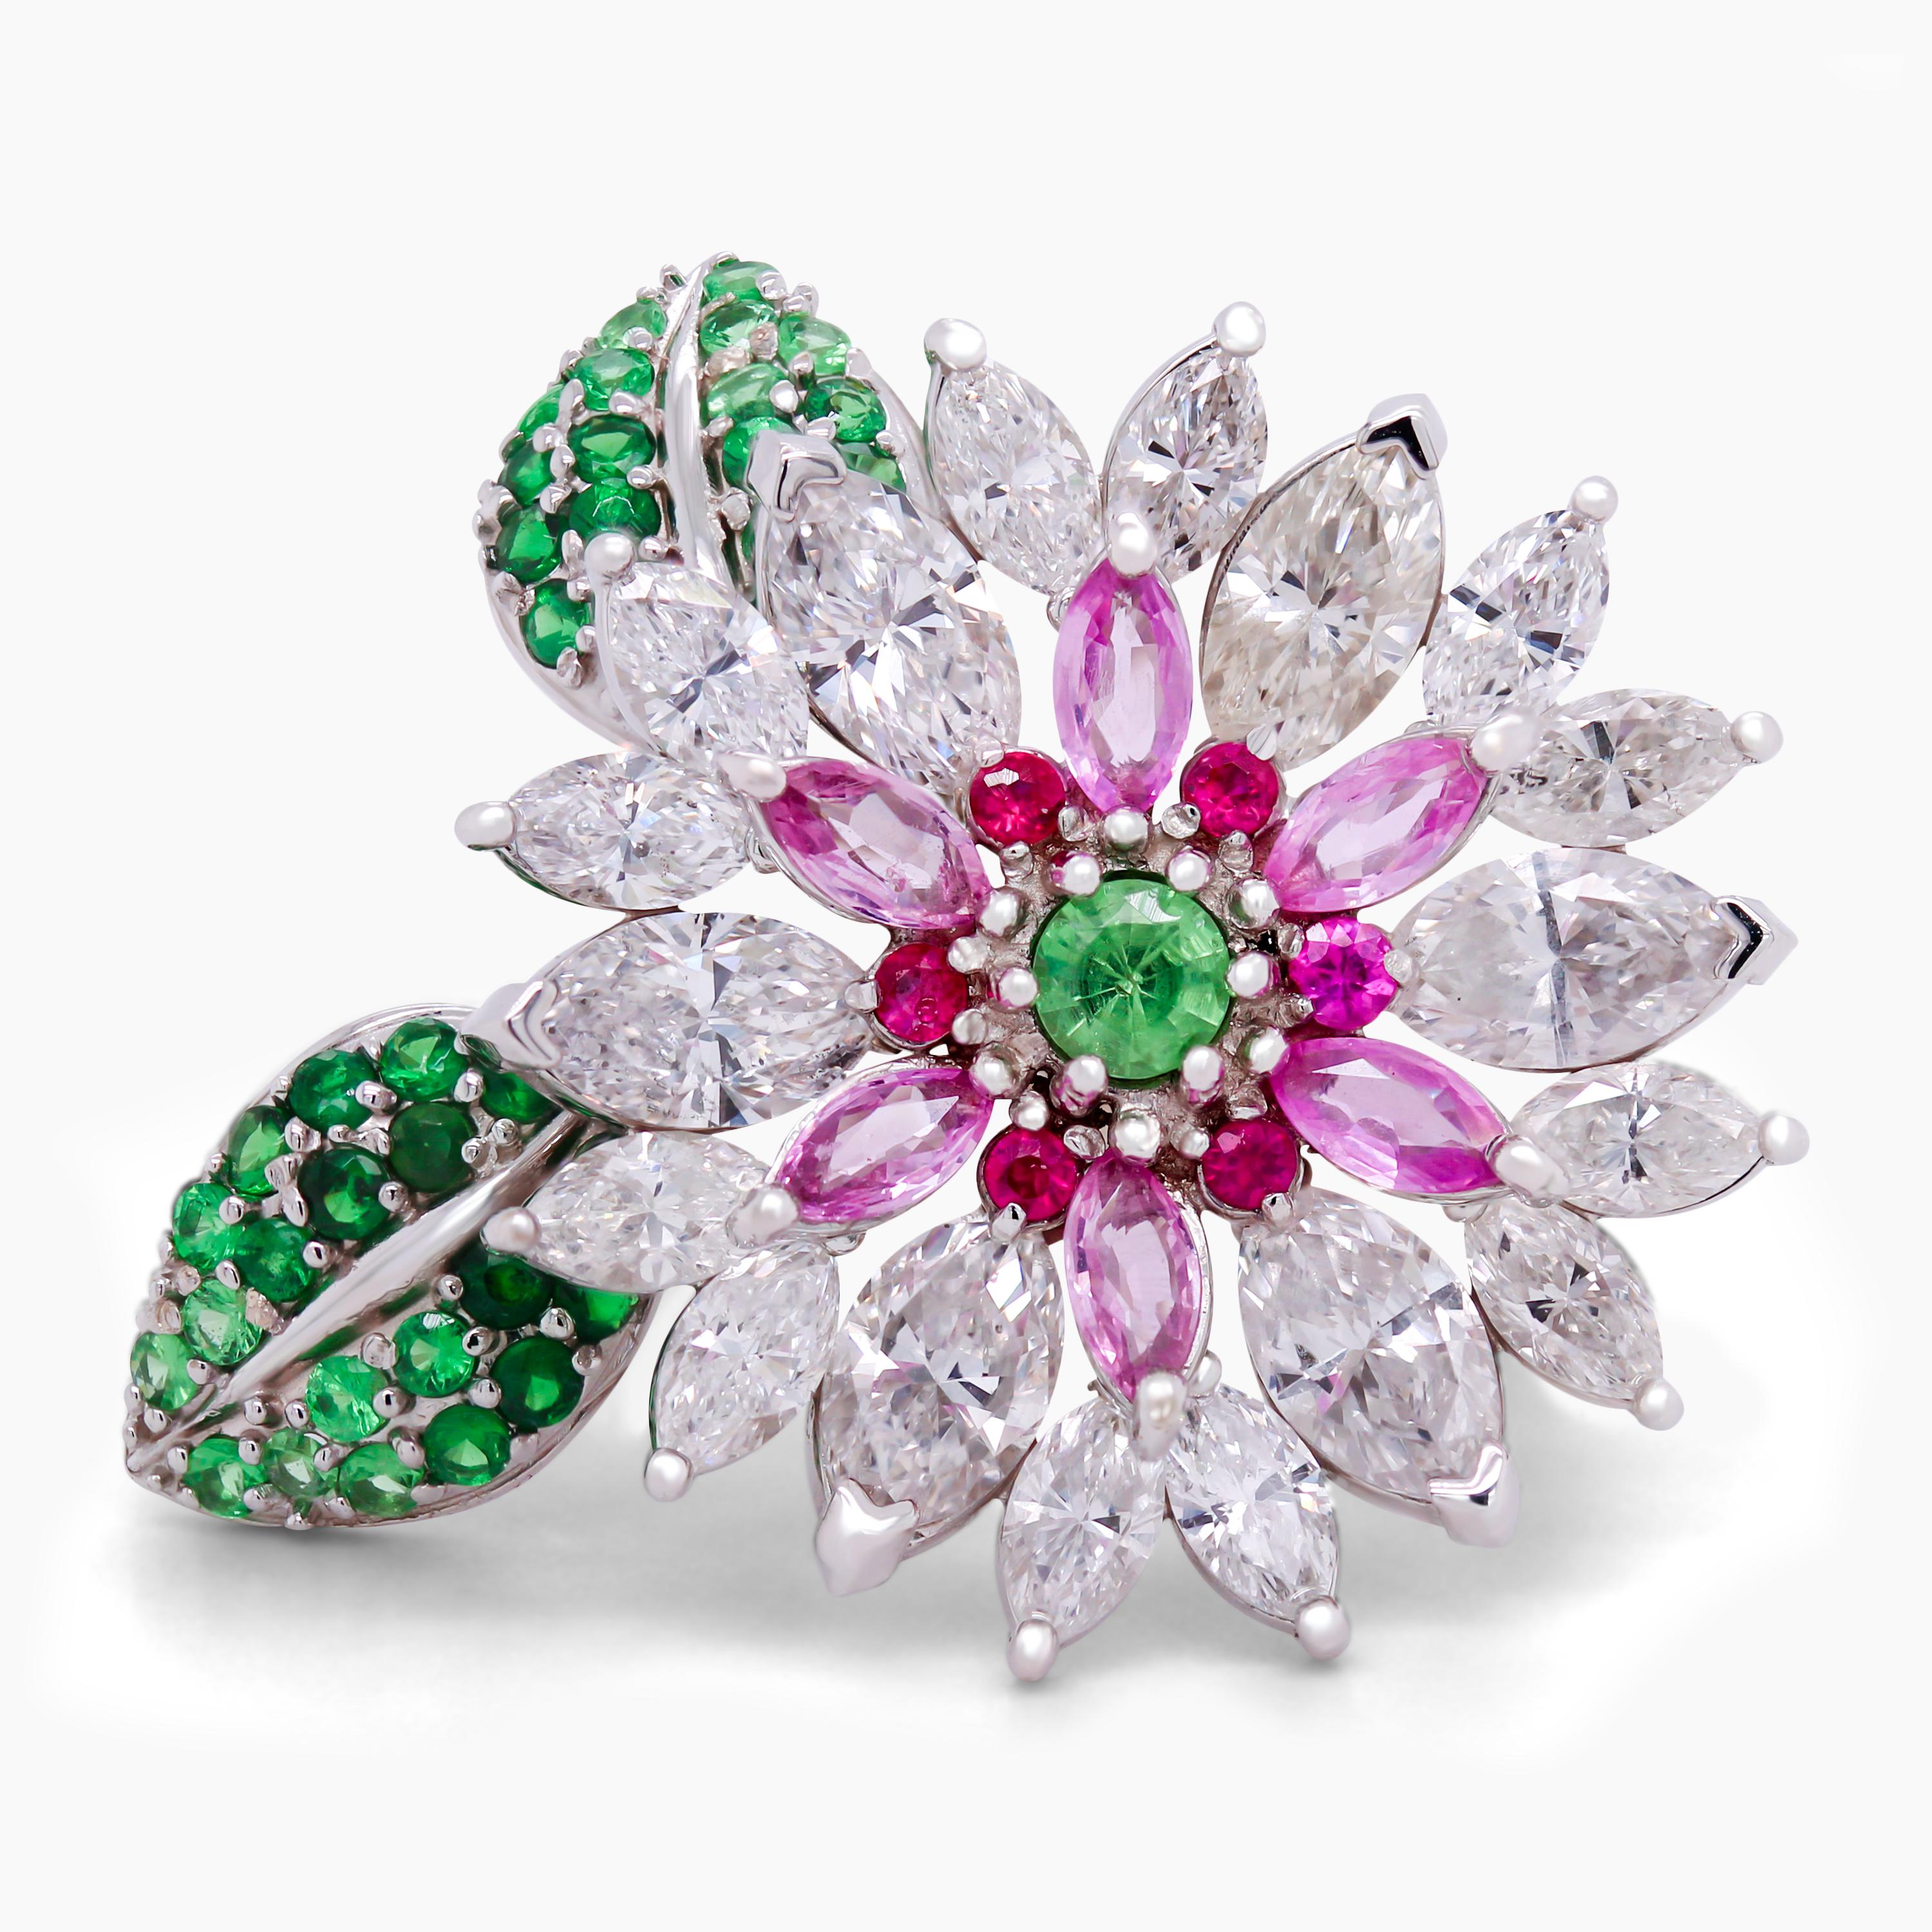 Stambolian 18K White Gold Marquise Diamond Pink Sapphire Tsavorite Floral Ring

This one-of-a-kind ring features a row of of marquise-cut diamonds with marquise-cut pink sapphires and a tsavorite center along with two leaves, shaded with dark to